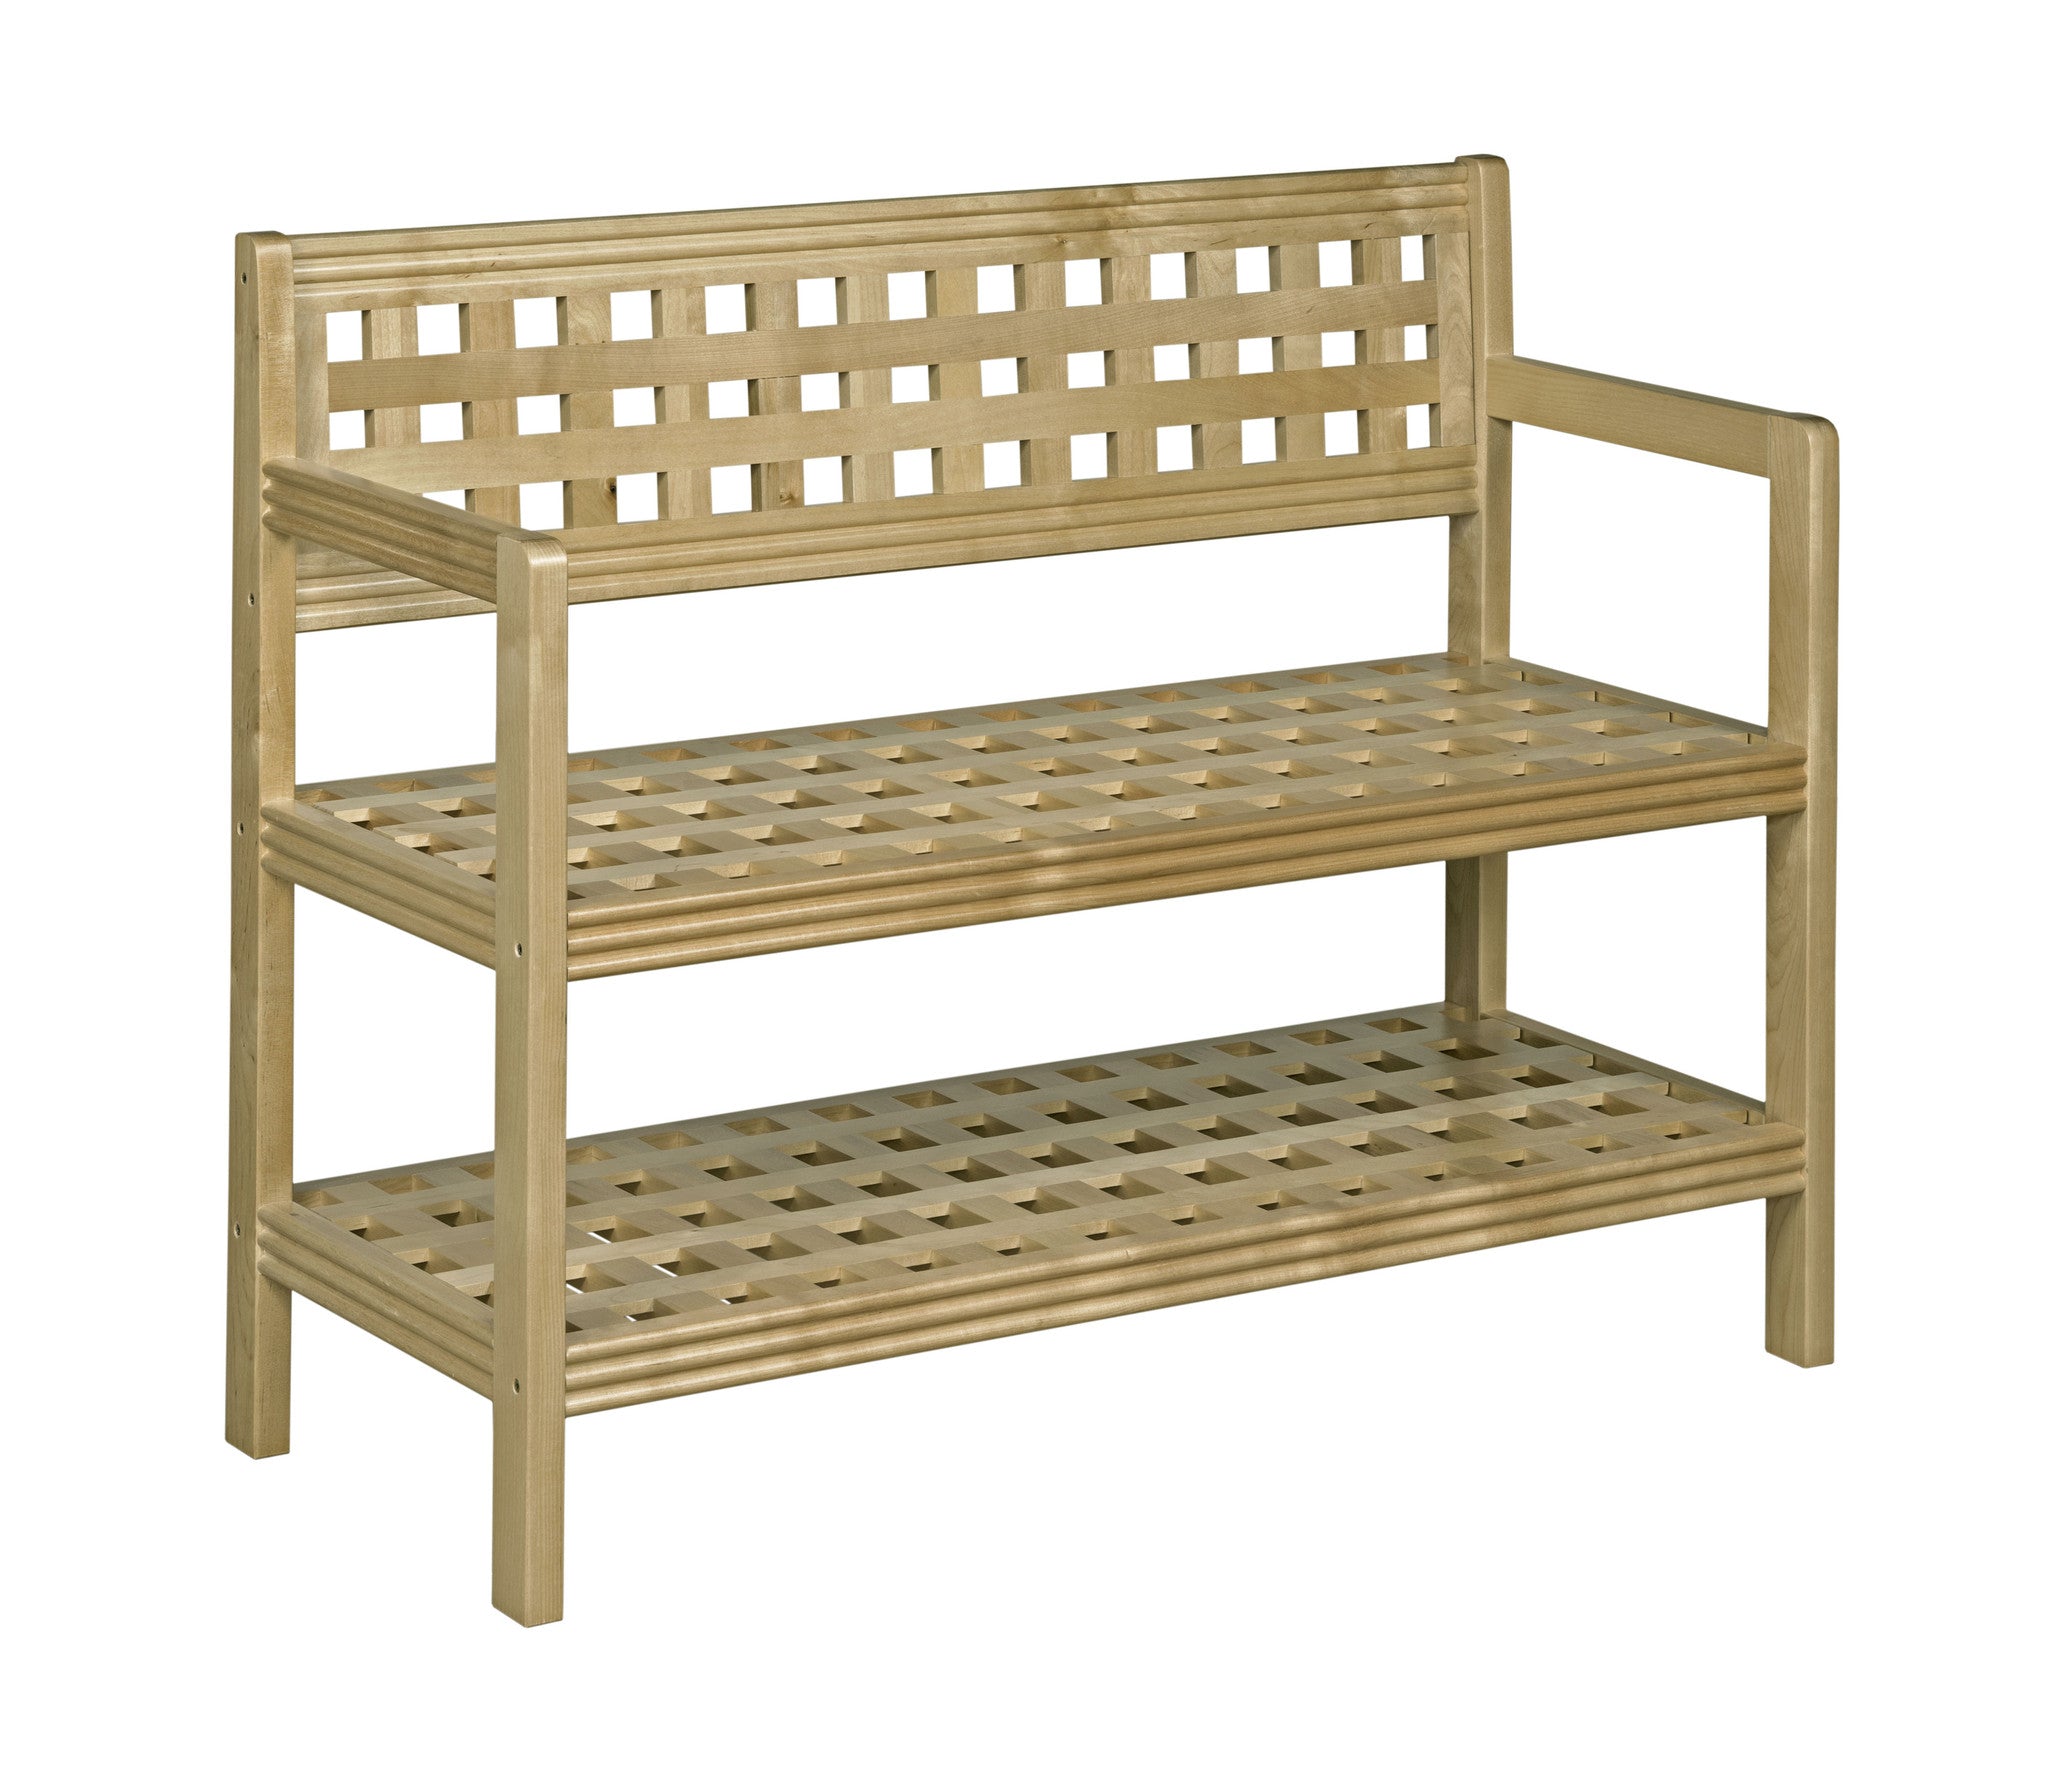 Beaumont Solid Birch Wood Large Bench with Back